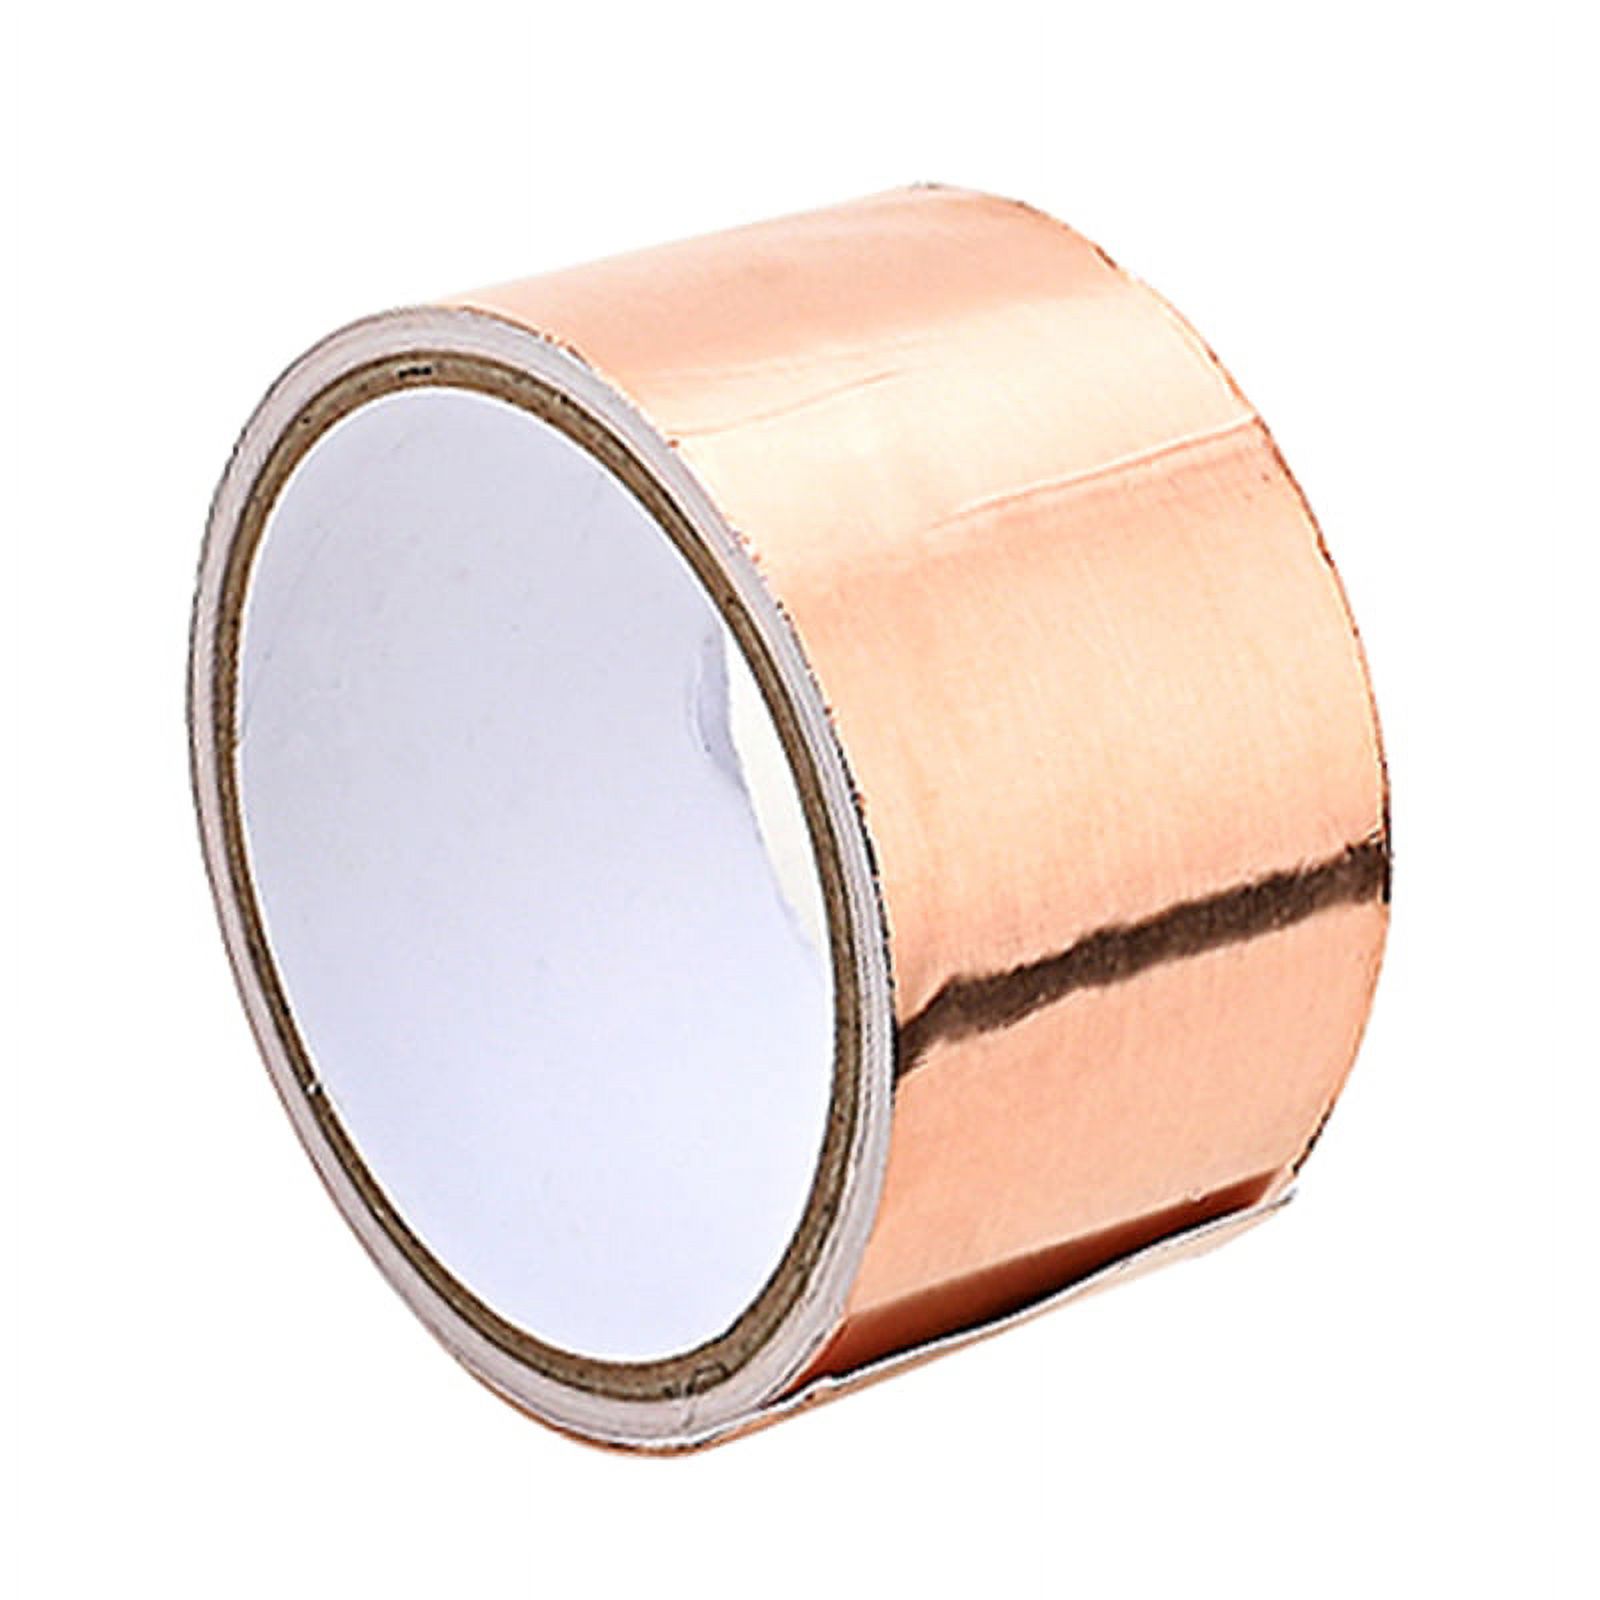 Copper Foil Tape Self Adhesive EMI Shielding Tape for Grounding, EMI &  Guitar Shielding, Stained Glass, Electric Repairs 